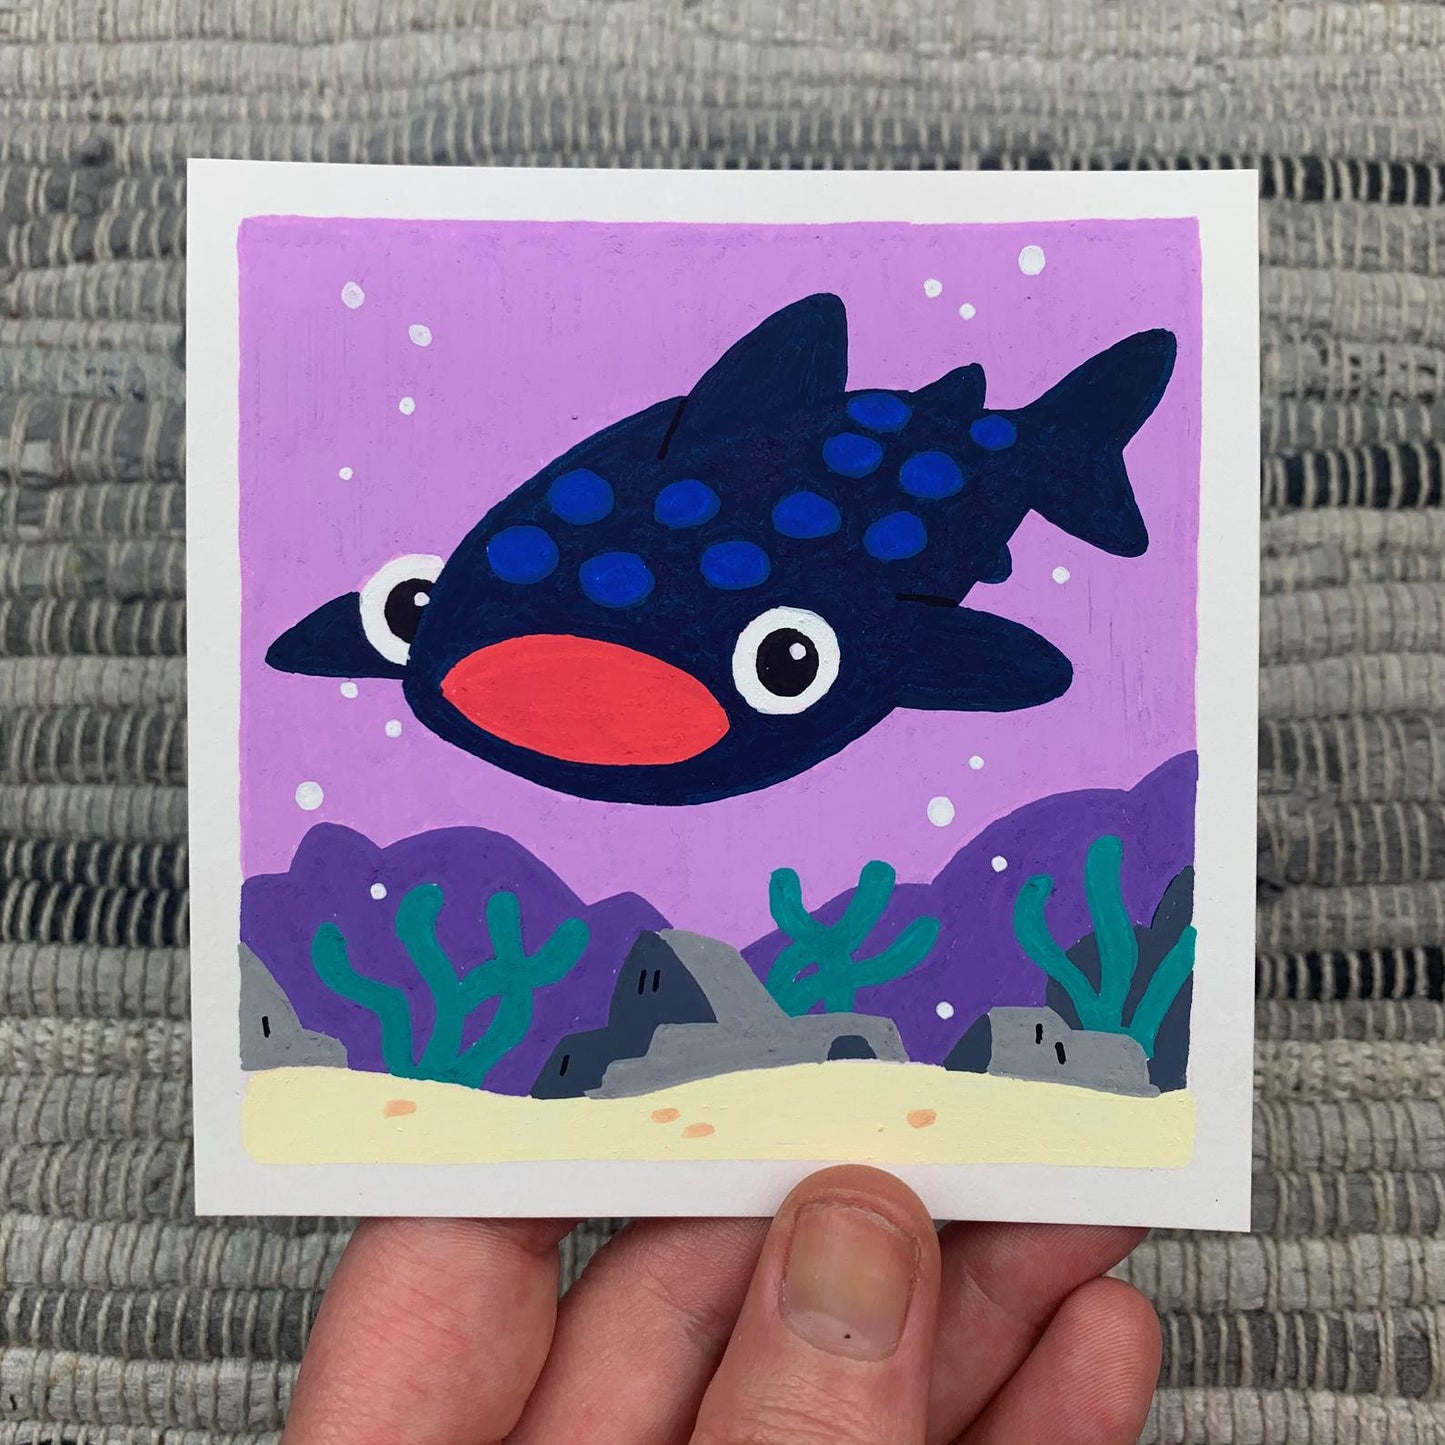 Original artwork of a cute whale shark swimming in a purple sea with his mouth open. Materials used: Uni-Posca paint markers.